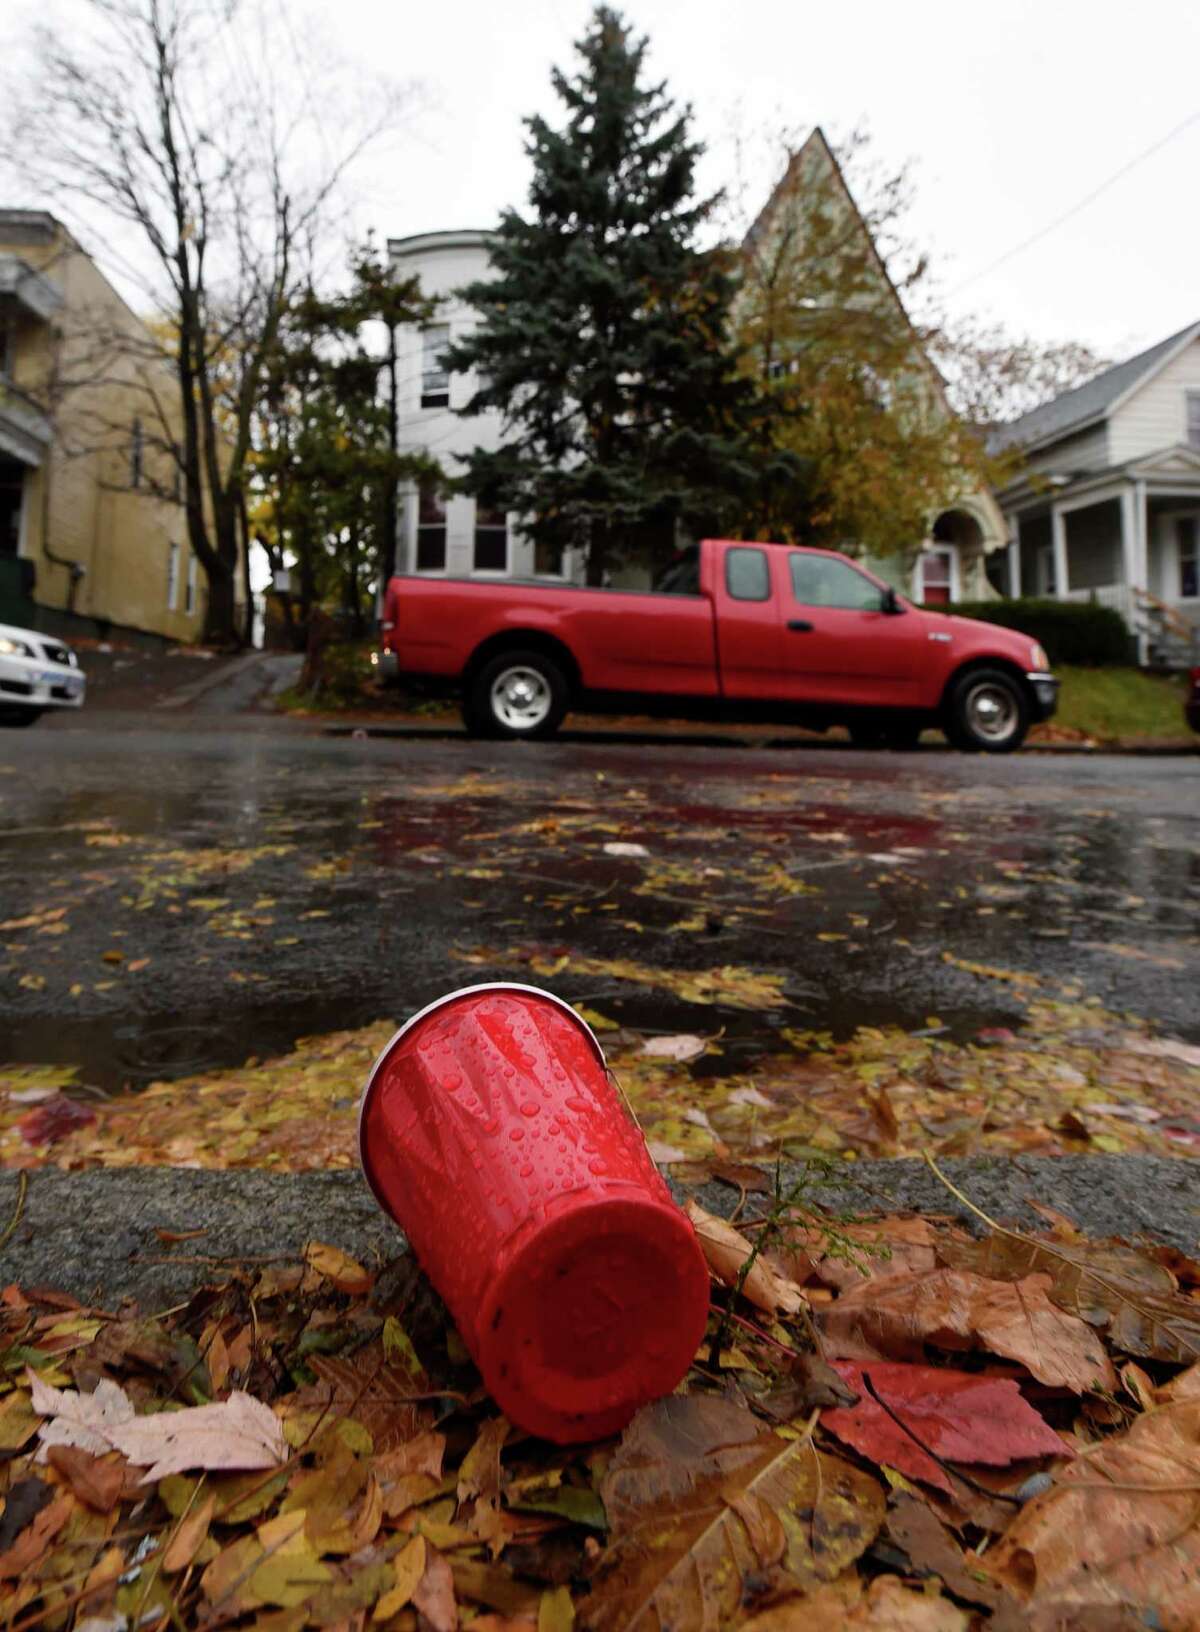 A red plastic cup litters the street across from 461 Hamilton Street at the scene of an alleged underage drinking party Monday afternoon, Nov. 17, 2014, in Albany, N.Y. Police responded to a call early Sunday morning and found five intoxicated 19-year-old men, all University at Albany students. One of them, Trevor Duffy, 19, of Bronx, died Monday at Albany Medical Center after excessive alcohol consumption.The other students were treated and released from area hospitals. (Skip Dickstein/Times Union)